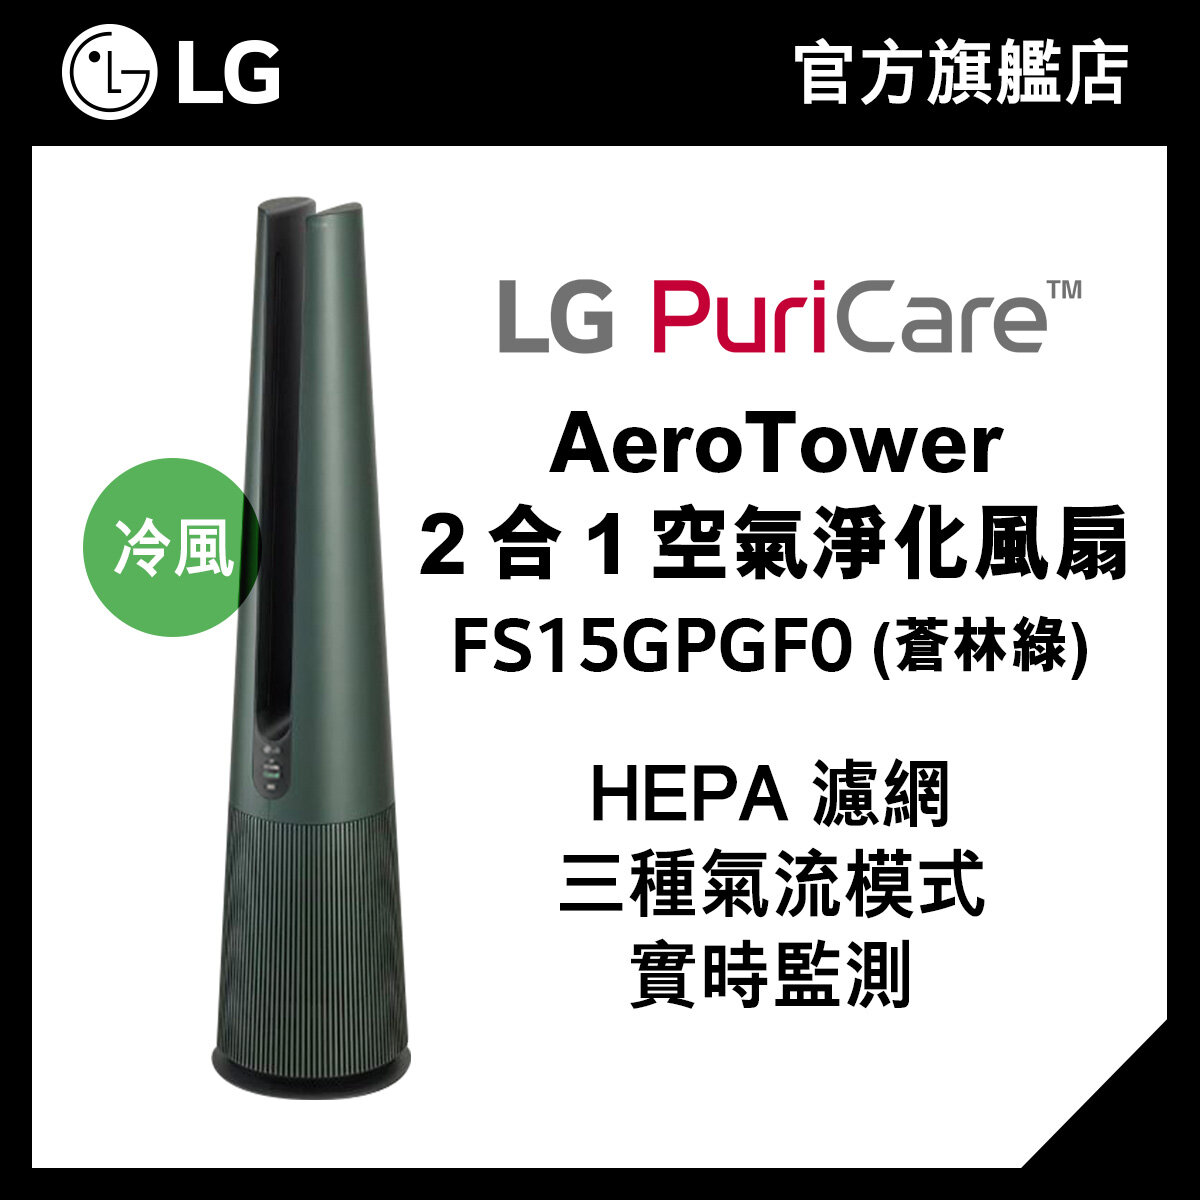 LG PuriCare™ AeroTower 2-in-1 Air Purifying Fan (Nature Green)